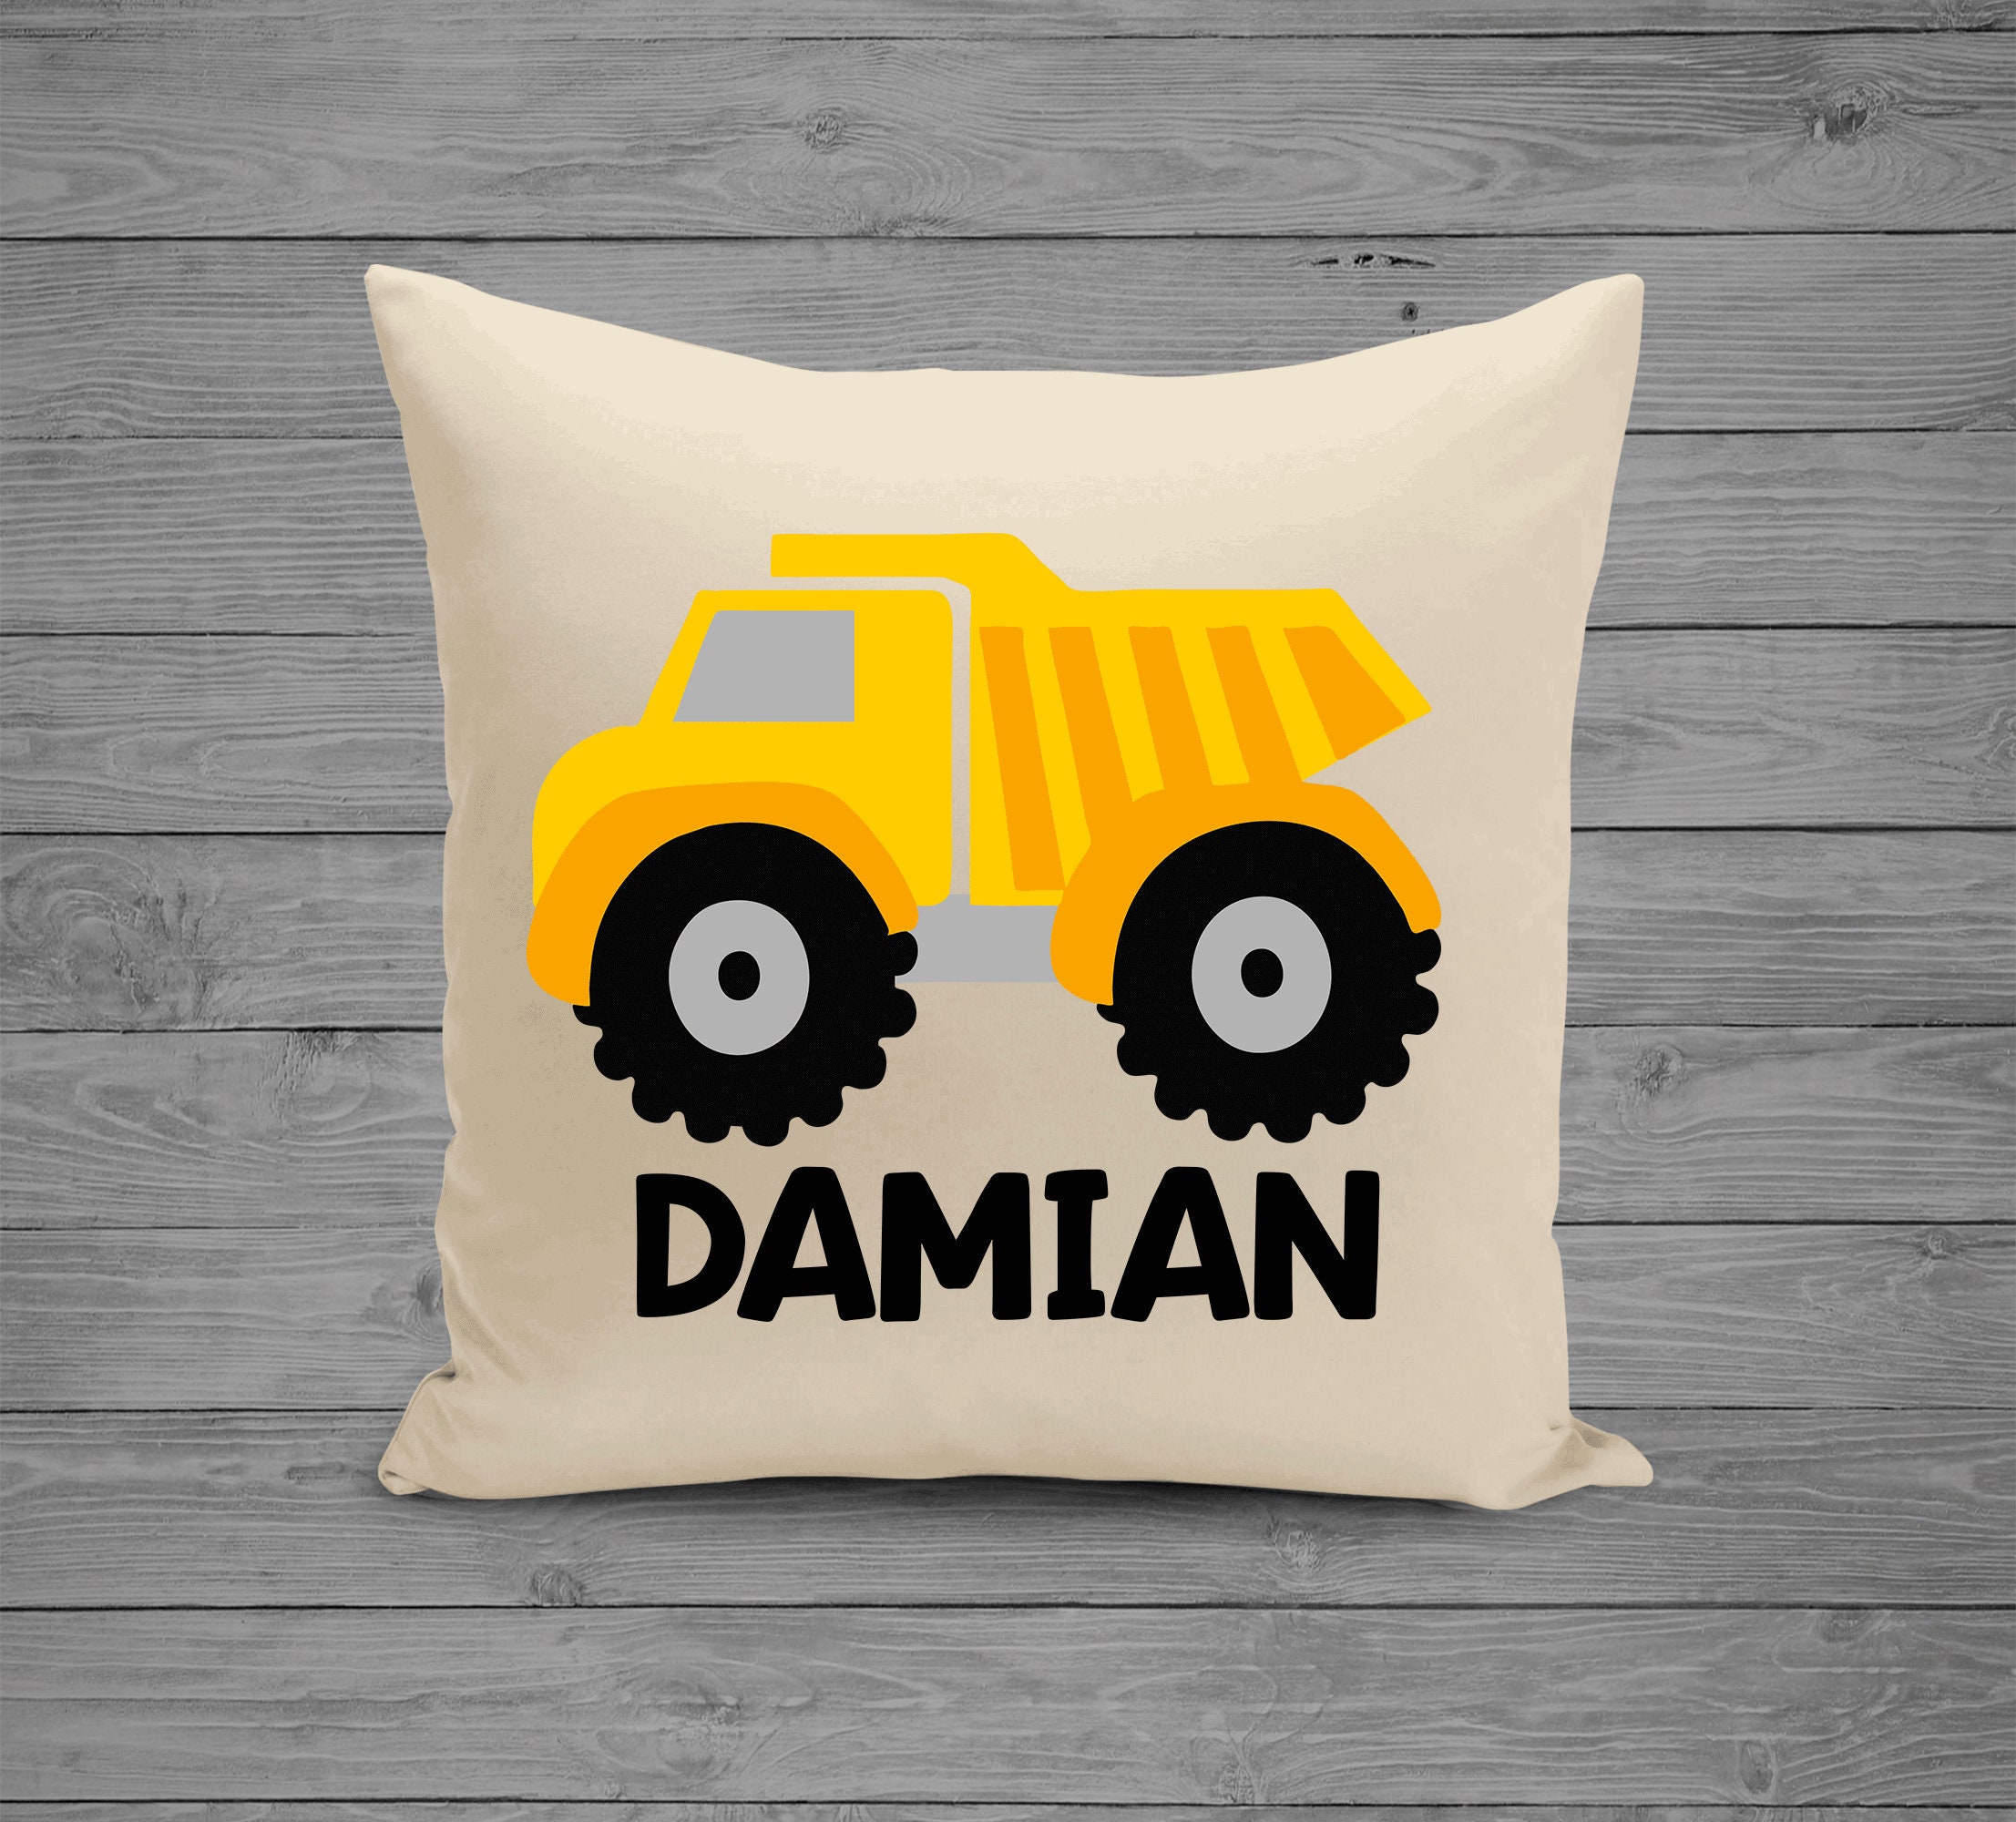 Dump Truck Shaped Pillow, Lorry Cushion for Kids, Decorative